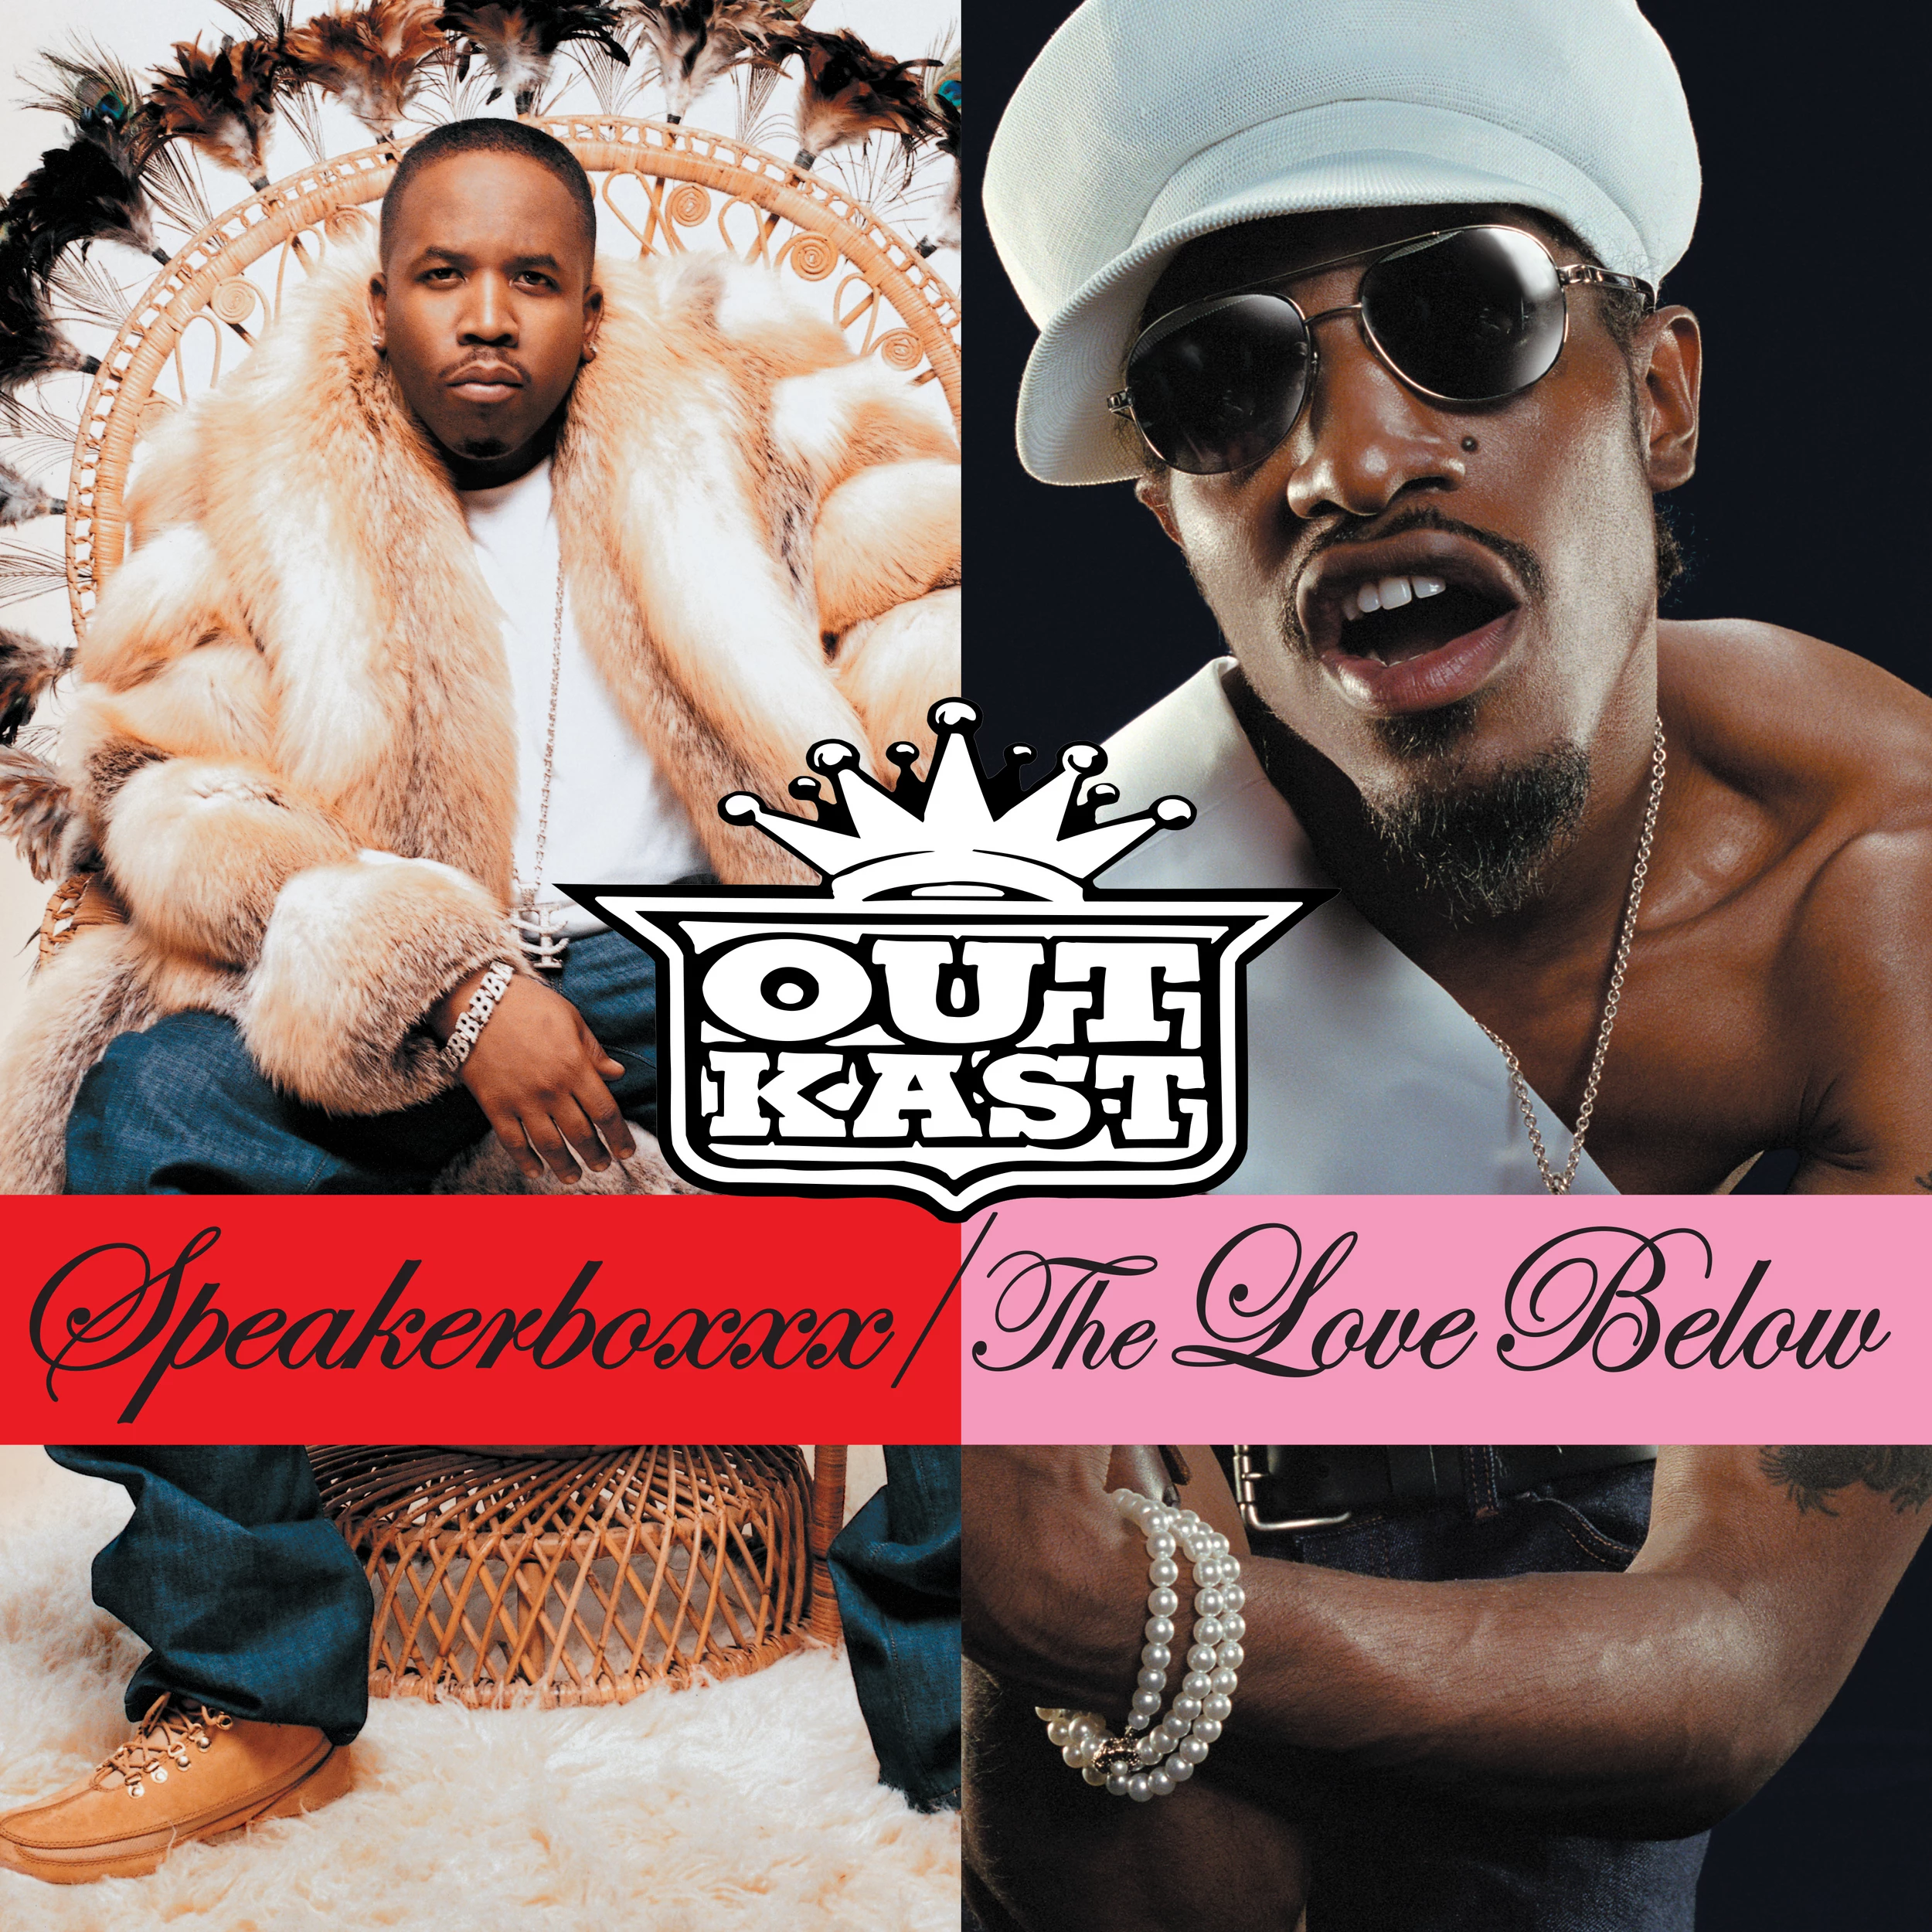 https://townsquare.media/site/812/files/2020/05/outkast.jpg